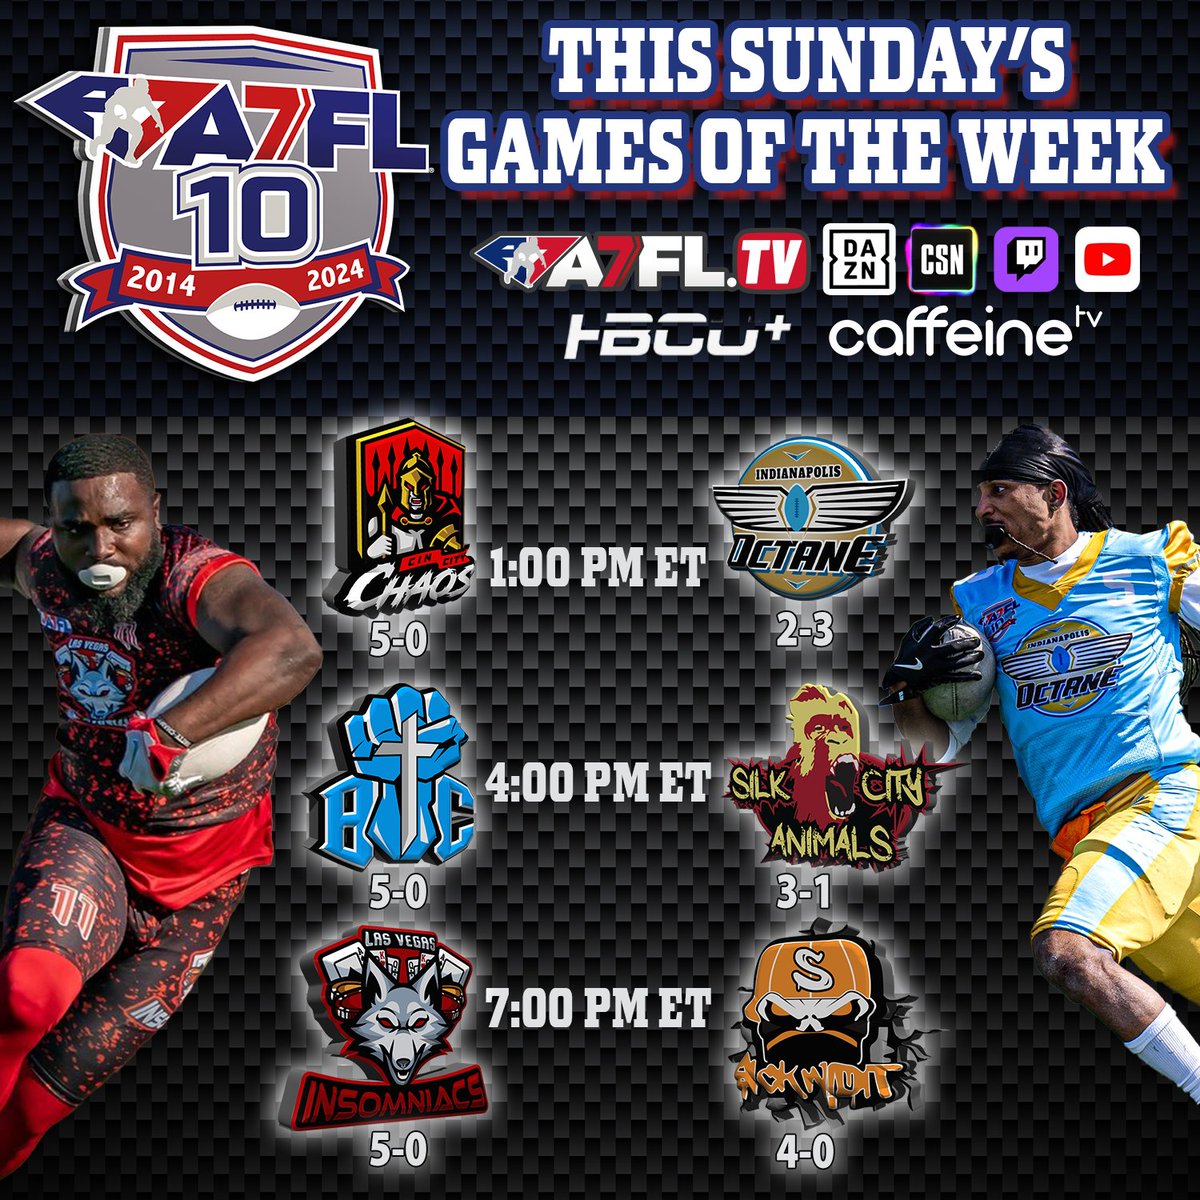 🏈 SUNDAY STARTING AT 1PM ET! Three great #7v7 No Helmets, No Pads Tackle #football matchups from #indianapolis - #newjersey - #lasvegas 👉🏾 SHARE and turn a friend on to the best spring league in the country!! #a7fl #livestream #youtubechannel #sunday